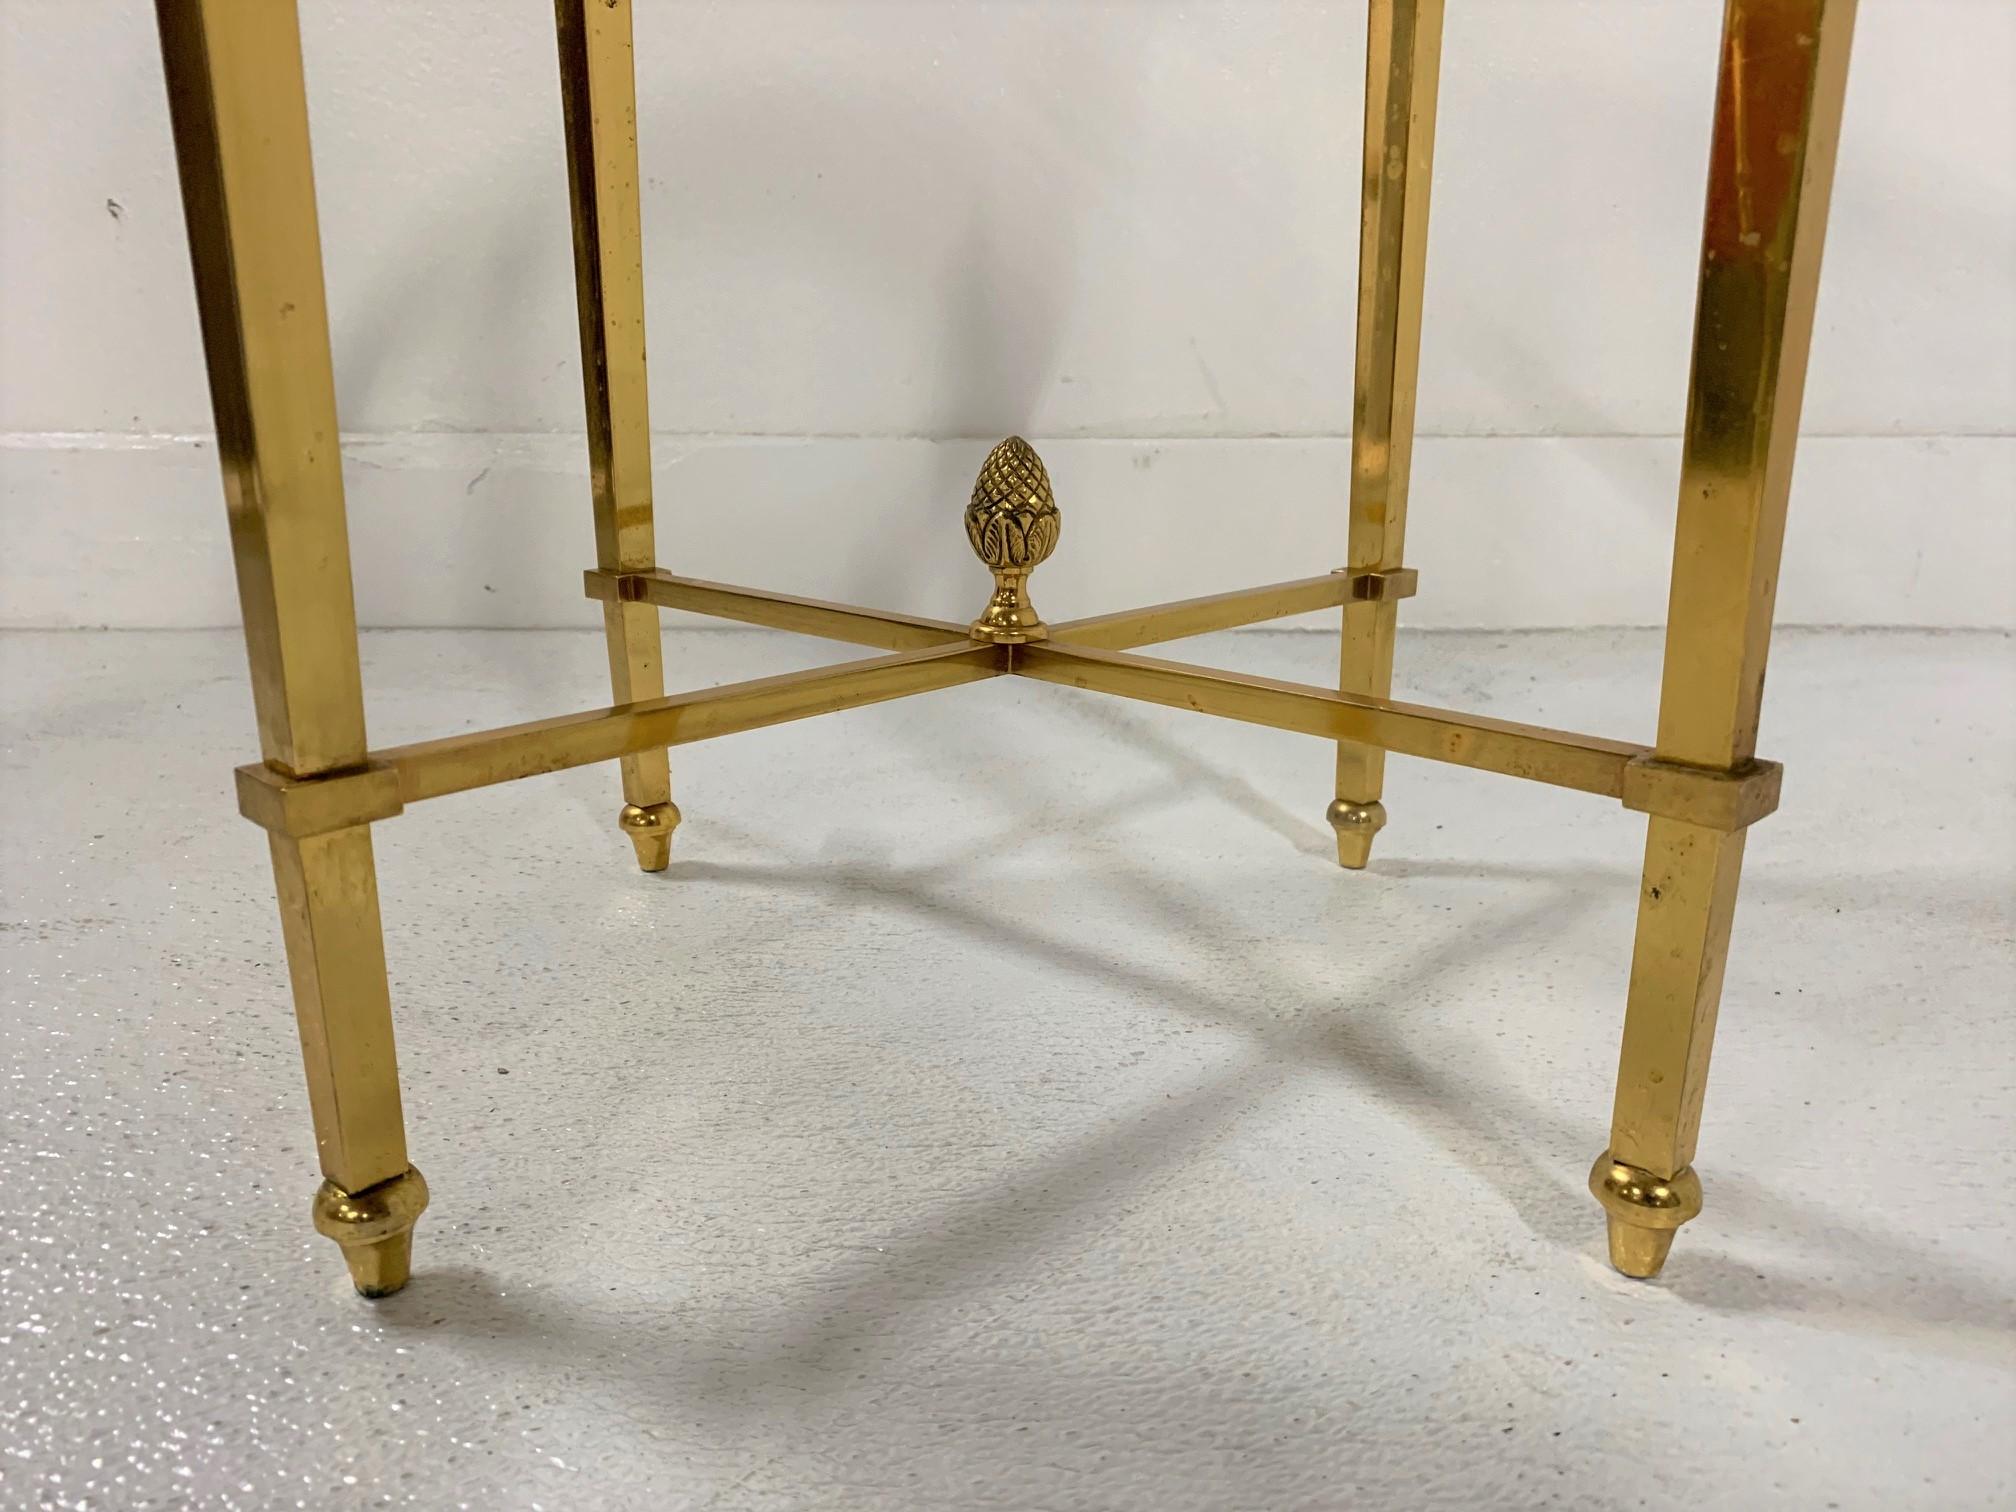 Mid-20th Century French Gilt Bronze and Glass Guéridon Table For Sale